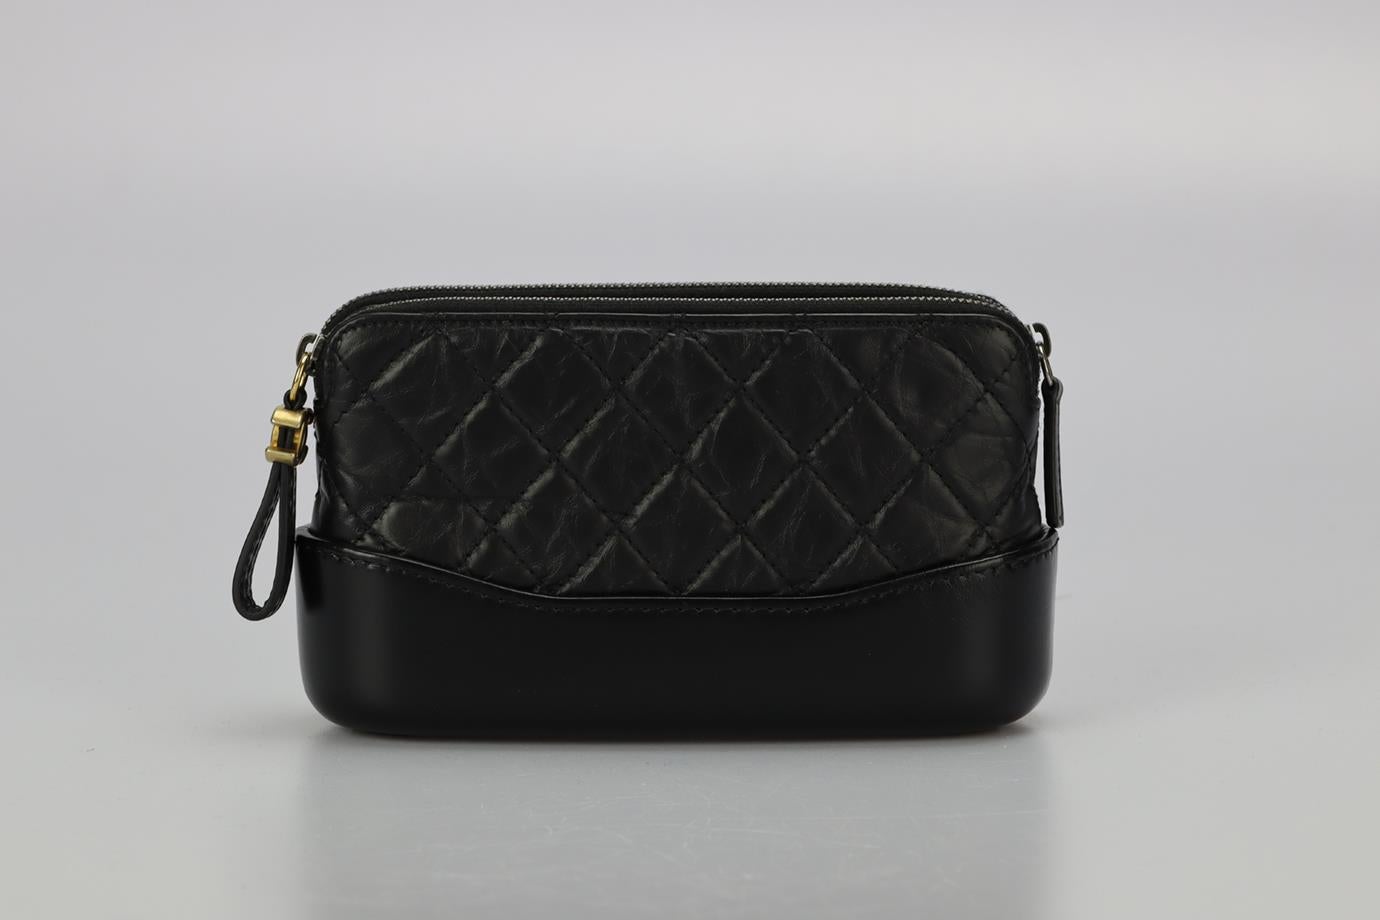 Chanel 2017 Gabrielle Clutch With Chain Quilted Leather Shoulder Bag. Black. Zip fastening - Top. Comes with - authenticity card. Does not come with - dustbag or box. Height: 4 in. Width: 6.9 in. Depth: 1.8 in. Handle drop: 17.5 in. Strap drop: 33